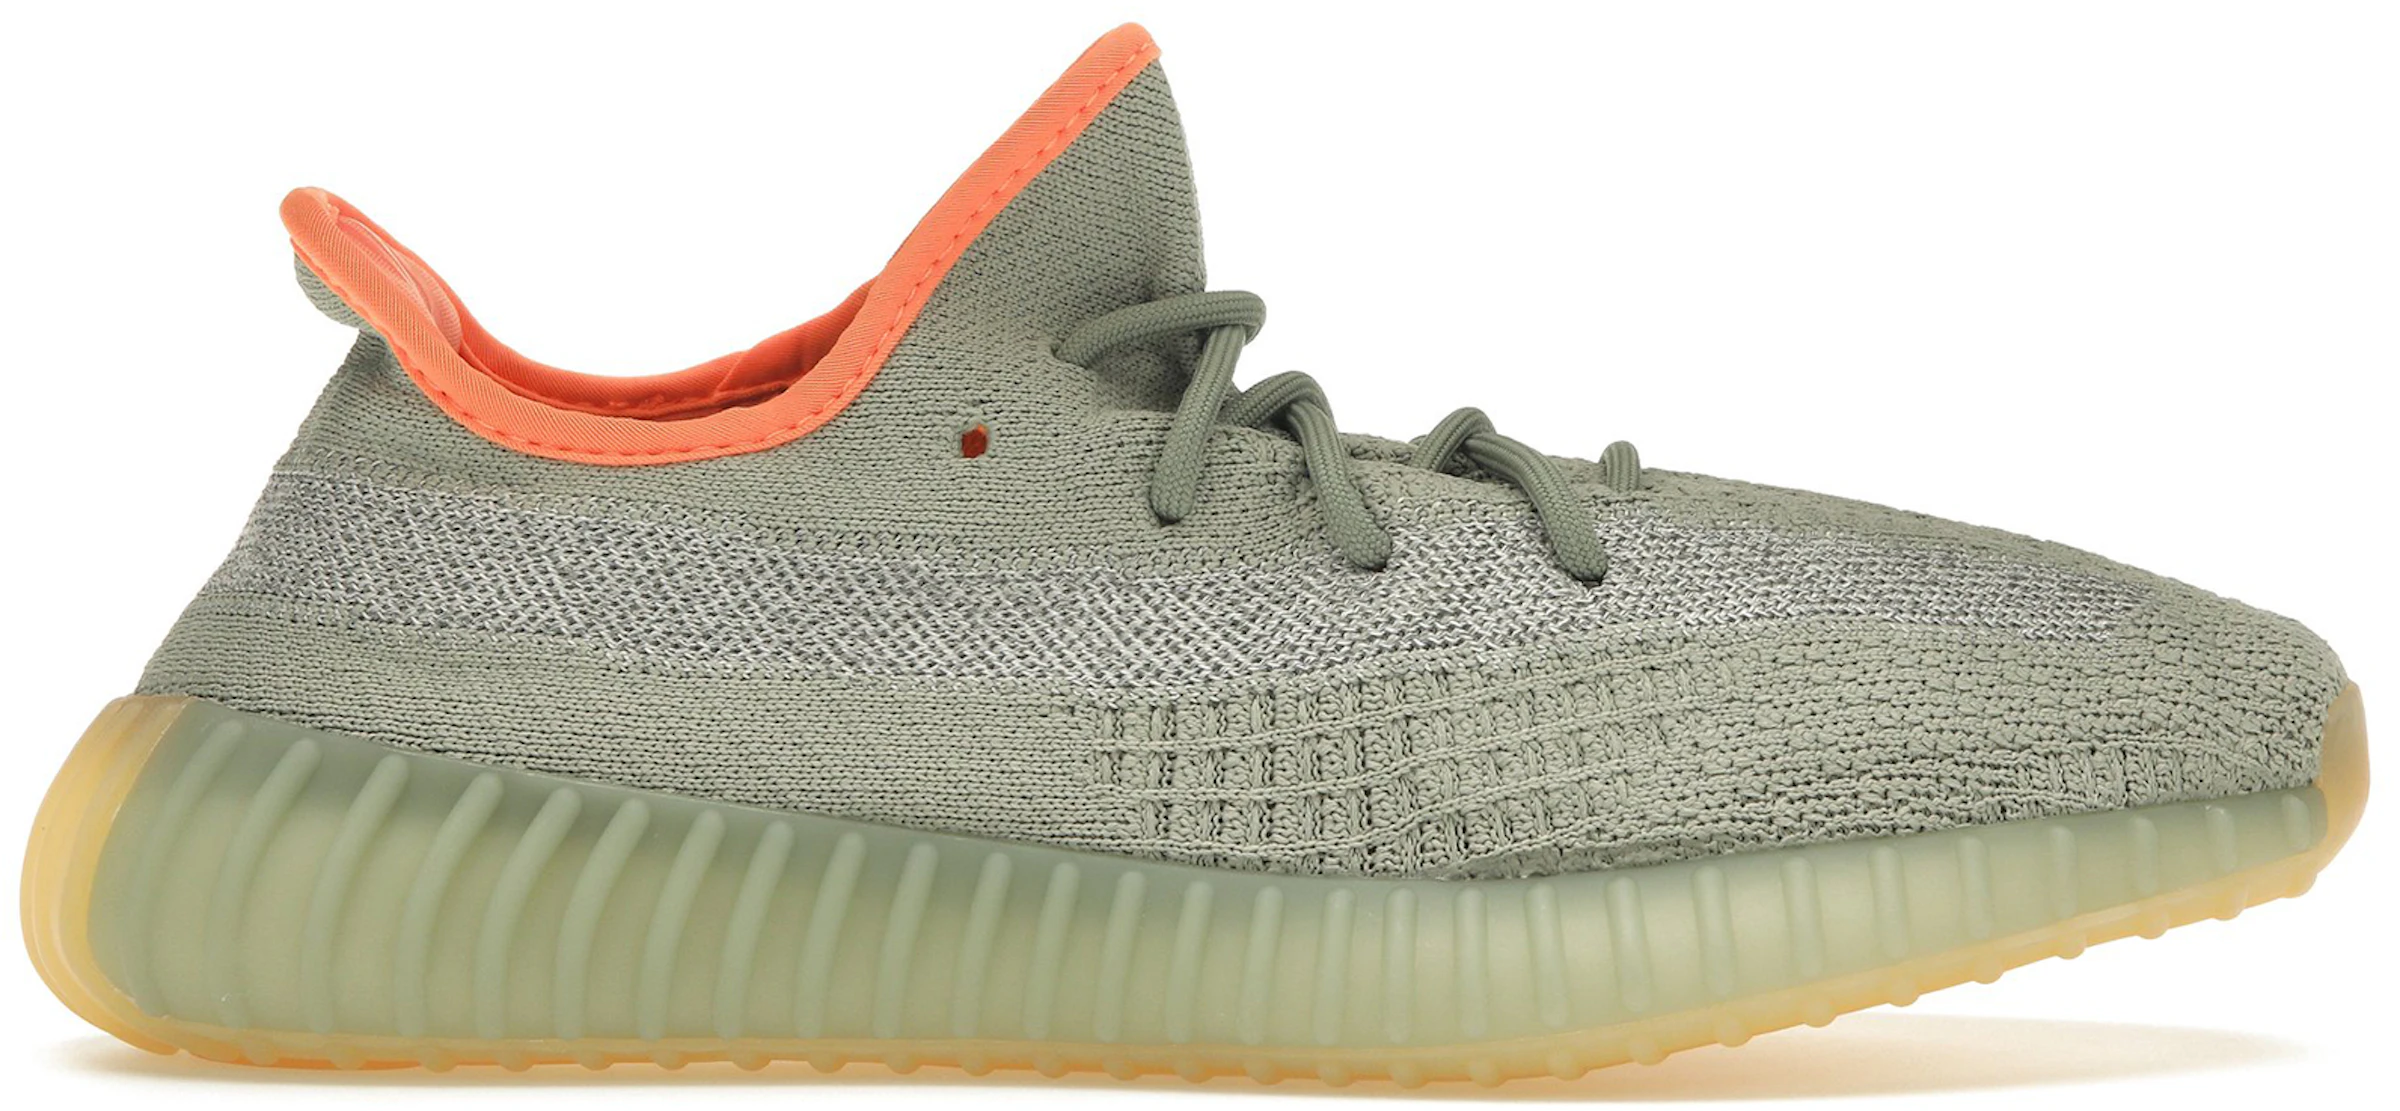 The Ultimate Yeezy 350 Sizing And Fit Guide Farfetch | vlr.eng.br